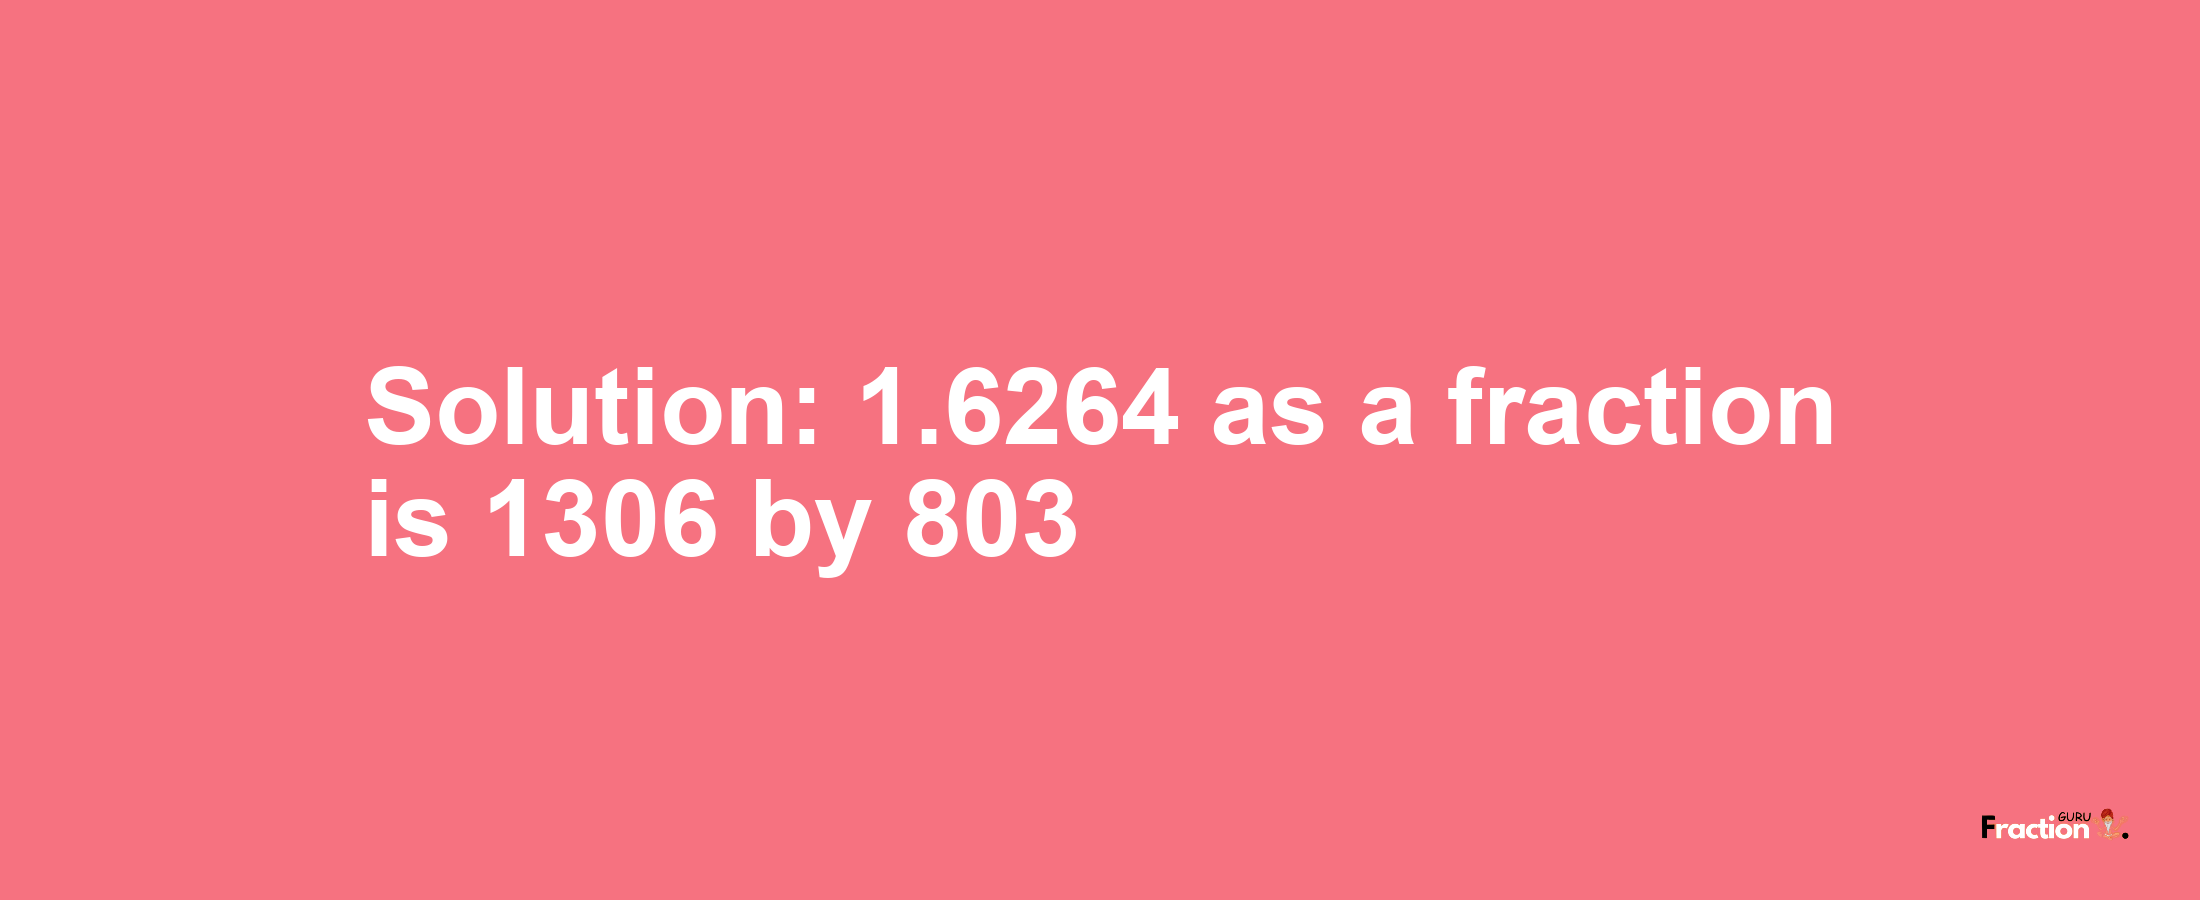 Solution:1.6264 as a fraction is 1306/803